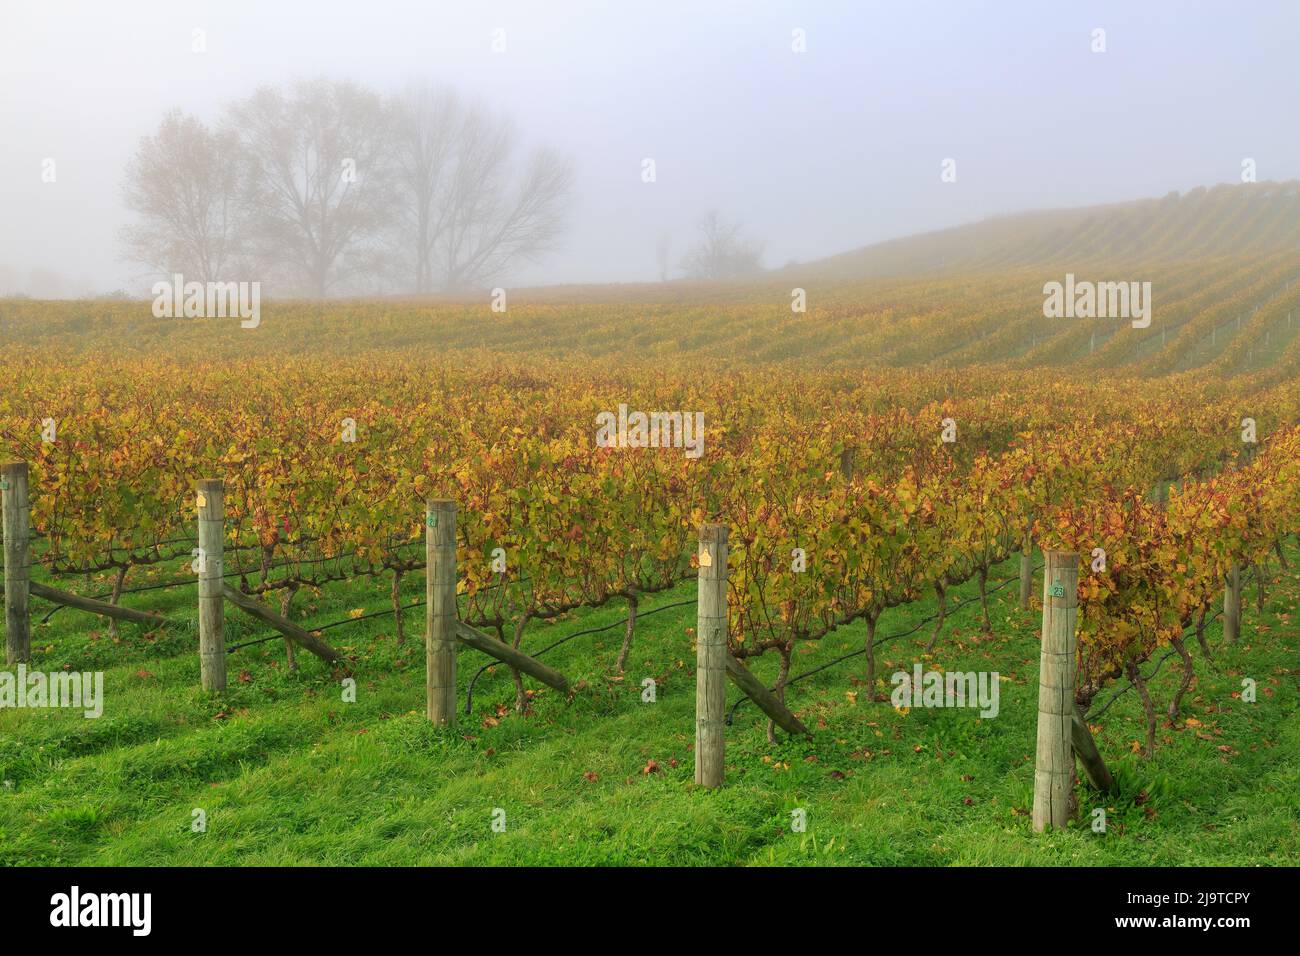 An autumn vineyard in the mist. Photographed in the Hawke's Bay region, New Zealand Stock Photo